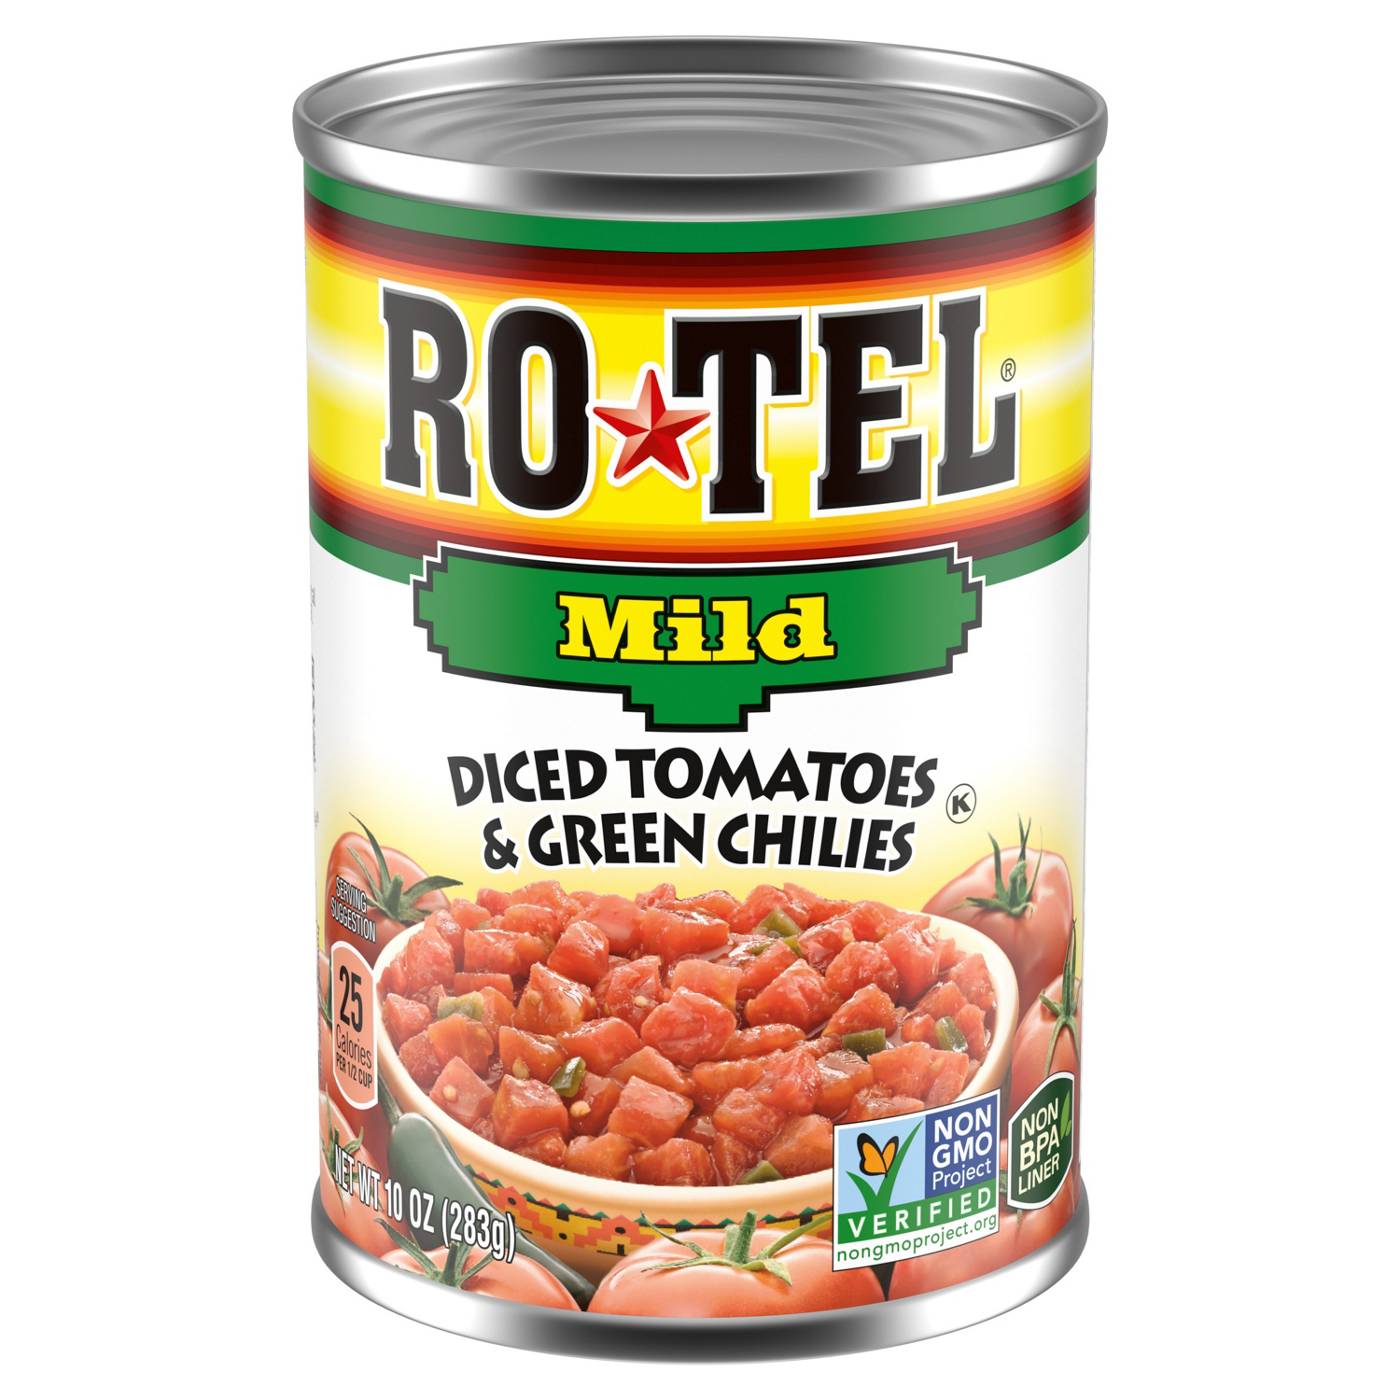 Ro-Tel Mild Diced Tomatoes and Green Chilies; image 1 of 6